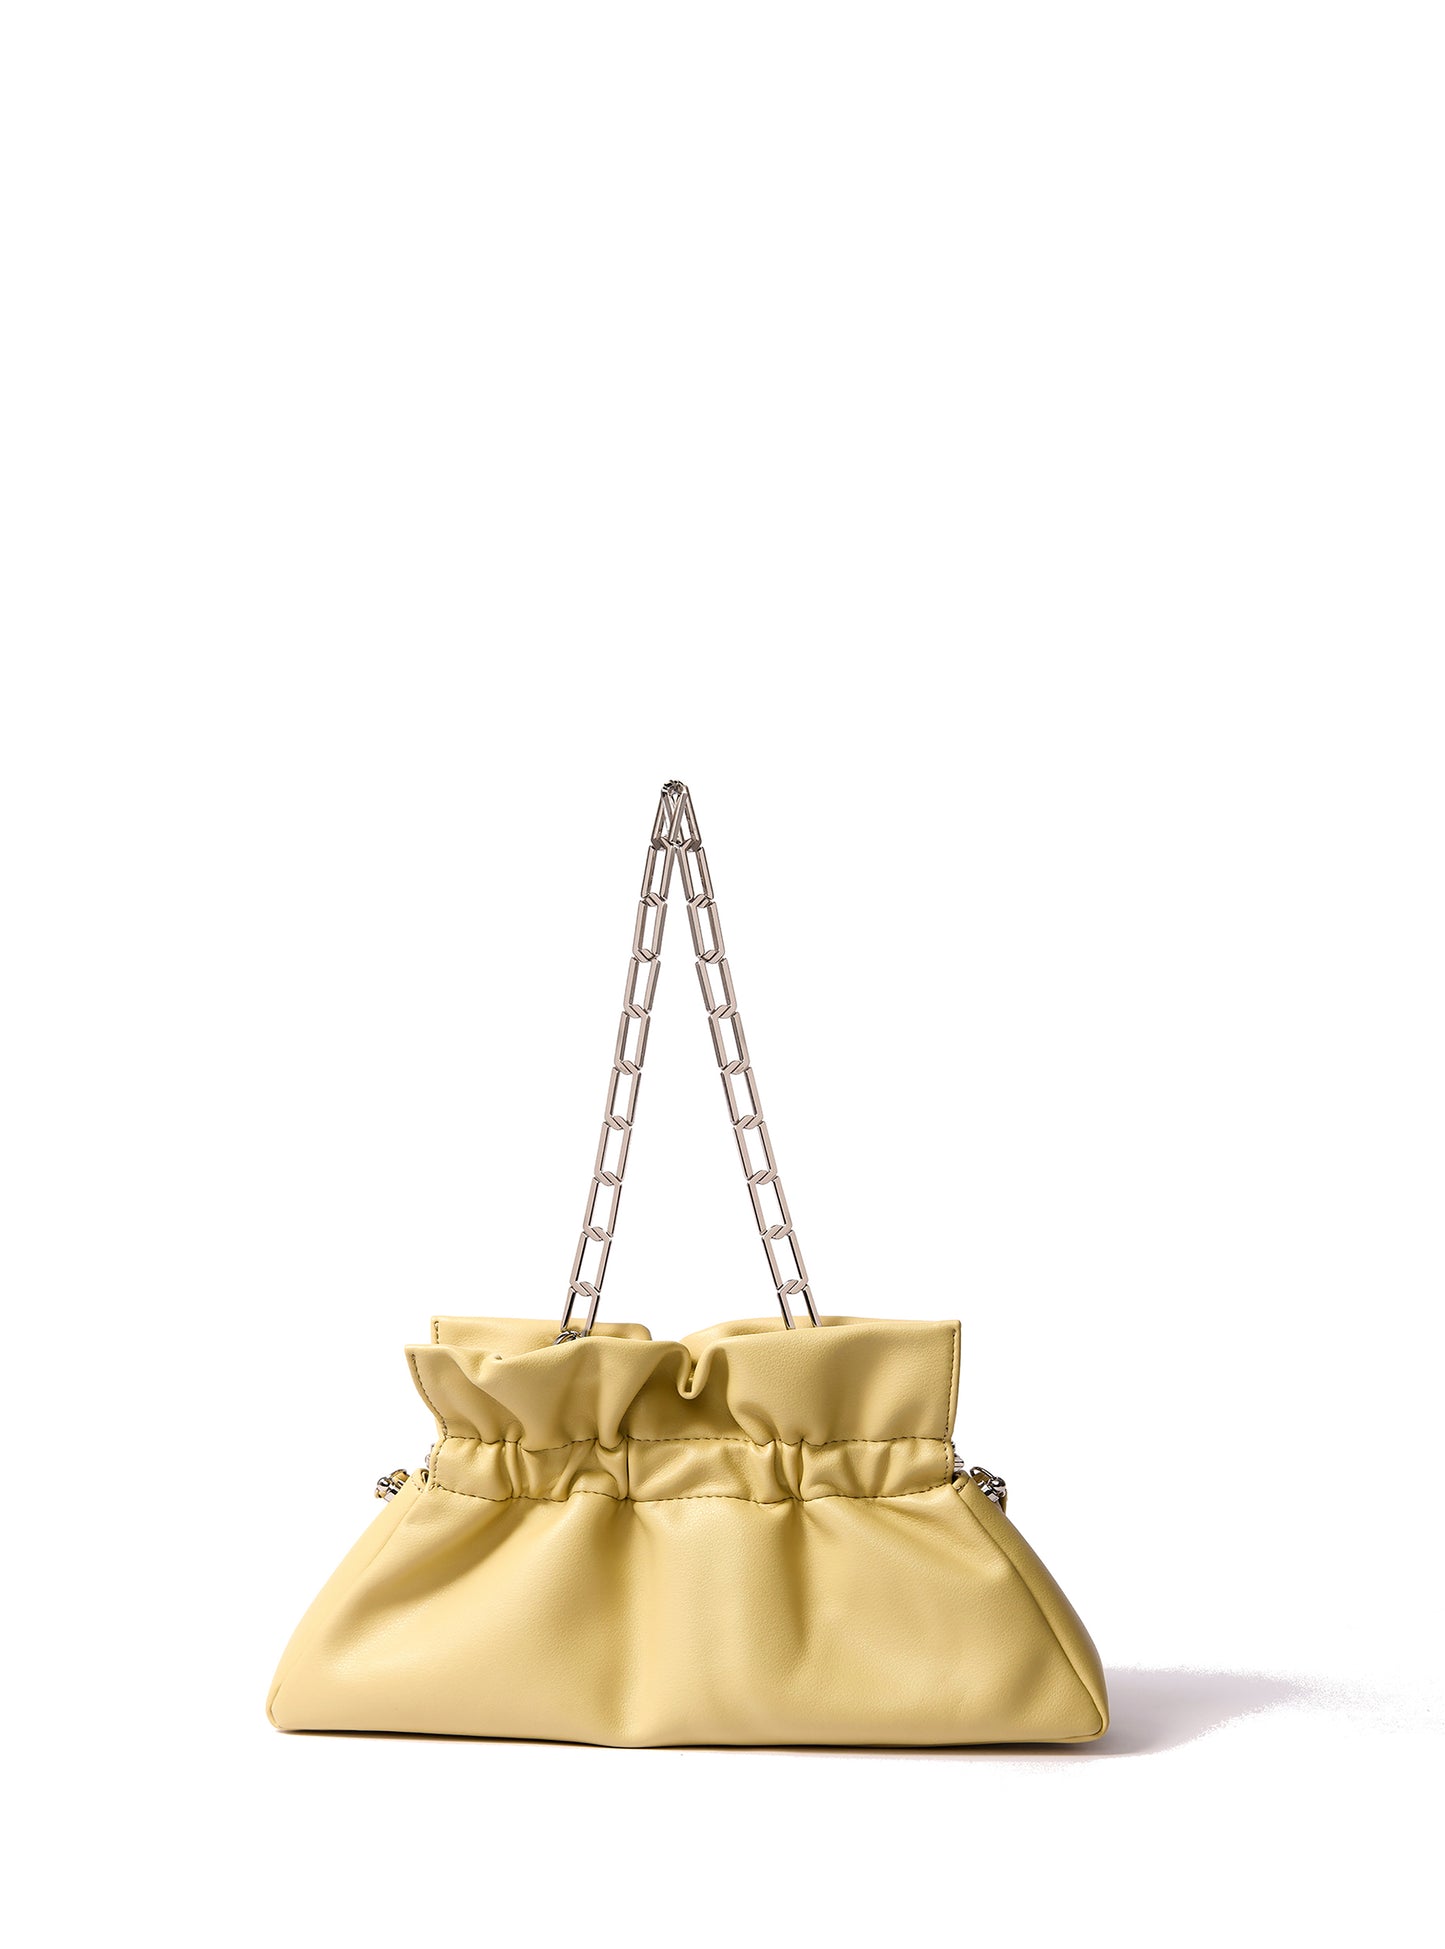 Mila Bag in Smooth Leather, Yellow